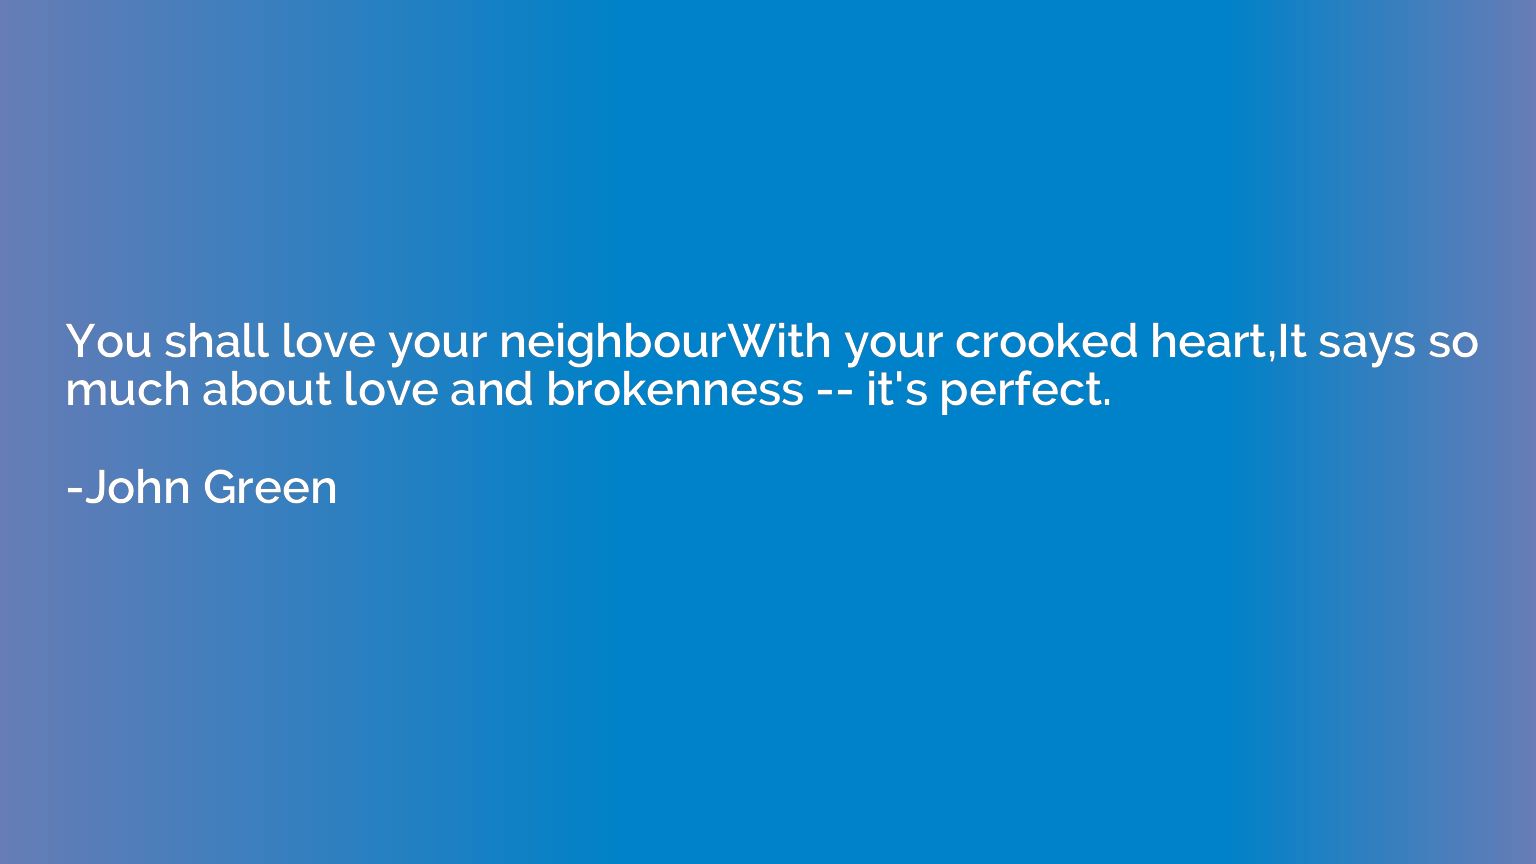 You shall love your neighbourWith your crooked heart,It says